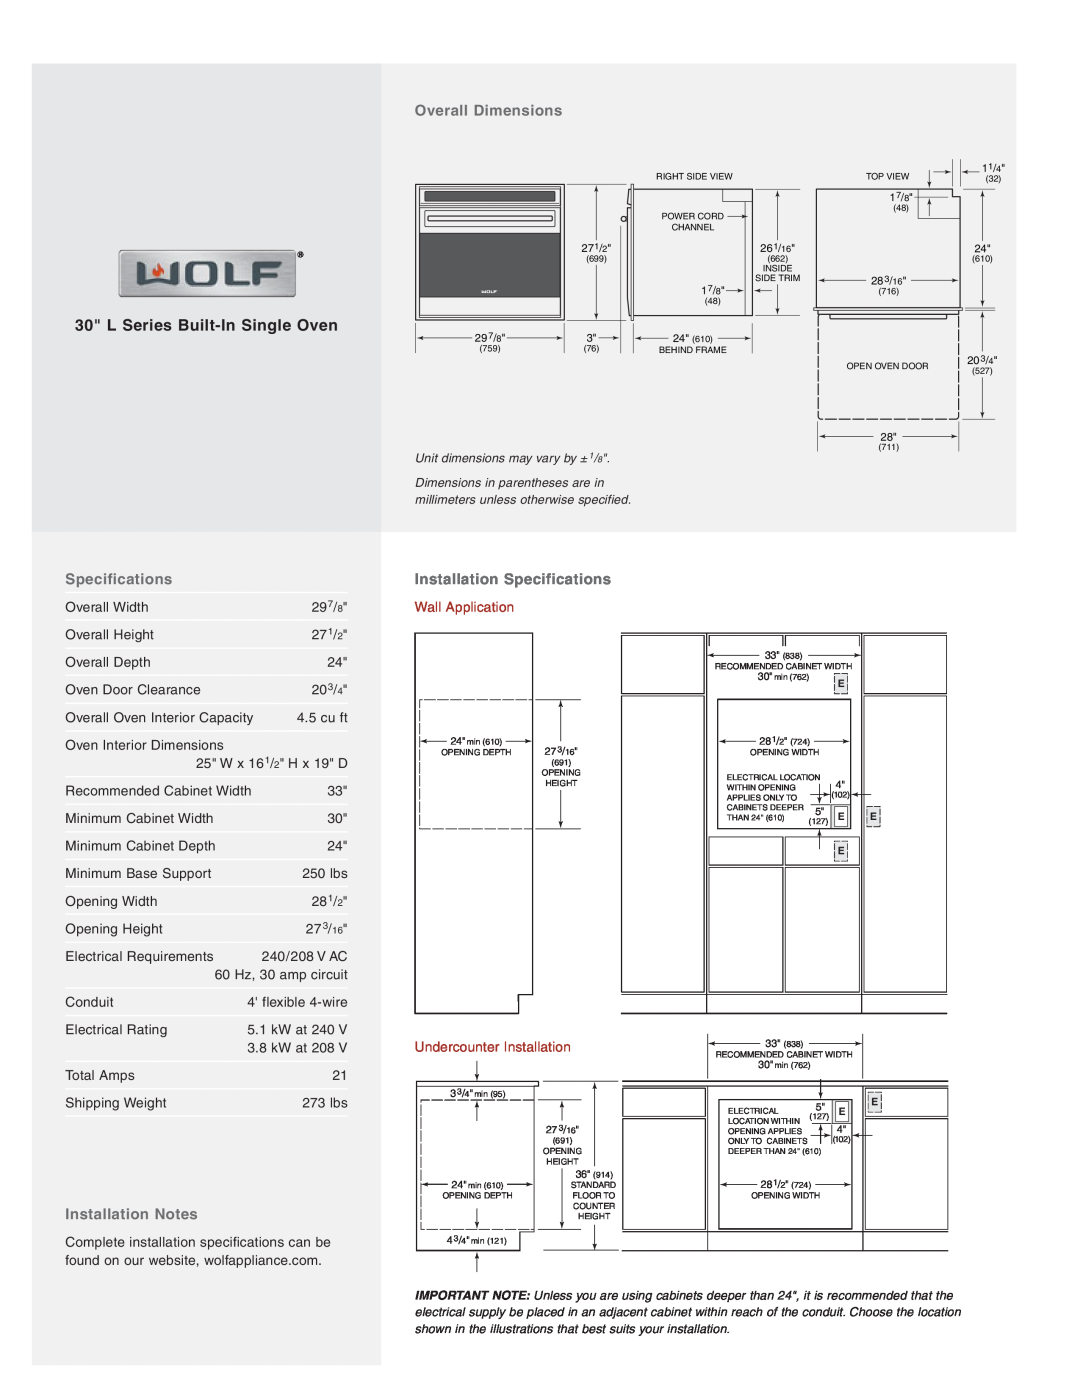 Wolf SO30U/S manual L Series Built-In Single Oven, Overall Dimensions, Specifications, Installation Notes, Wall Application 